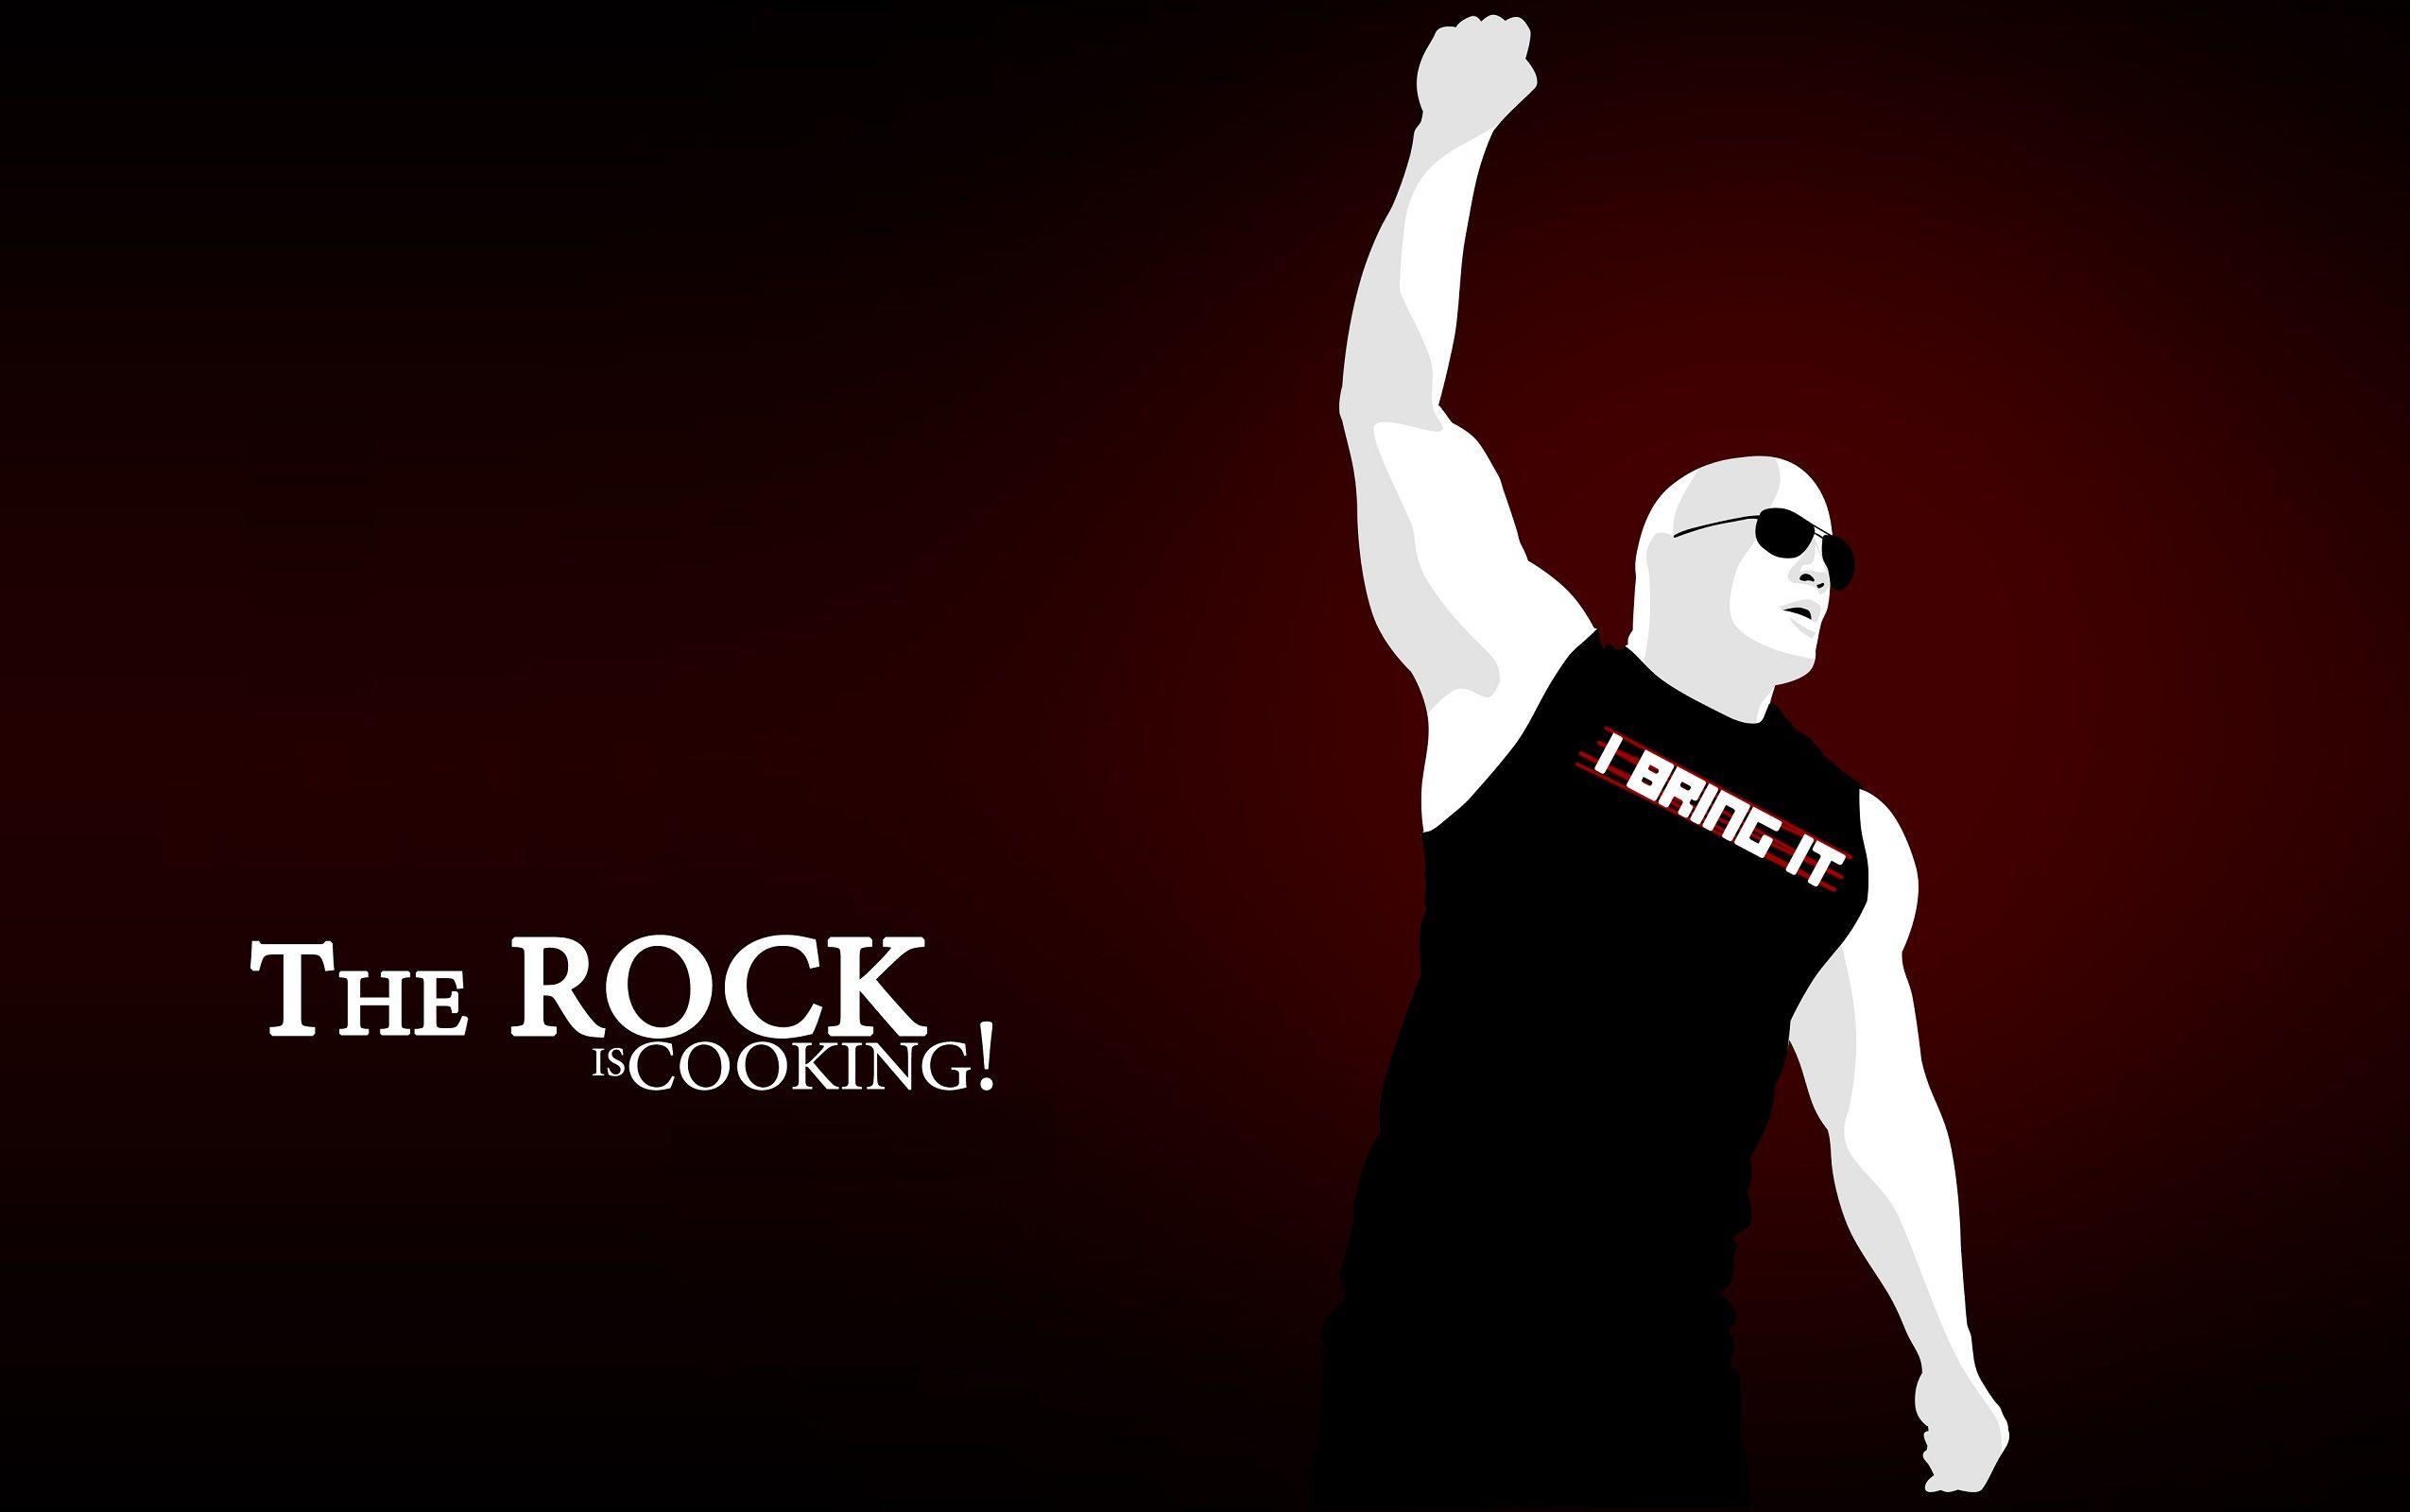 The Rock Is Cooking wallpaper